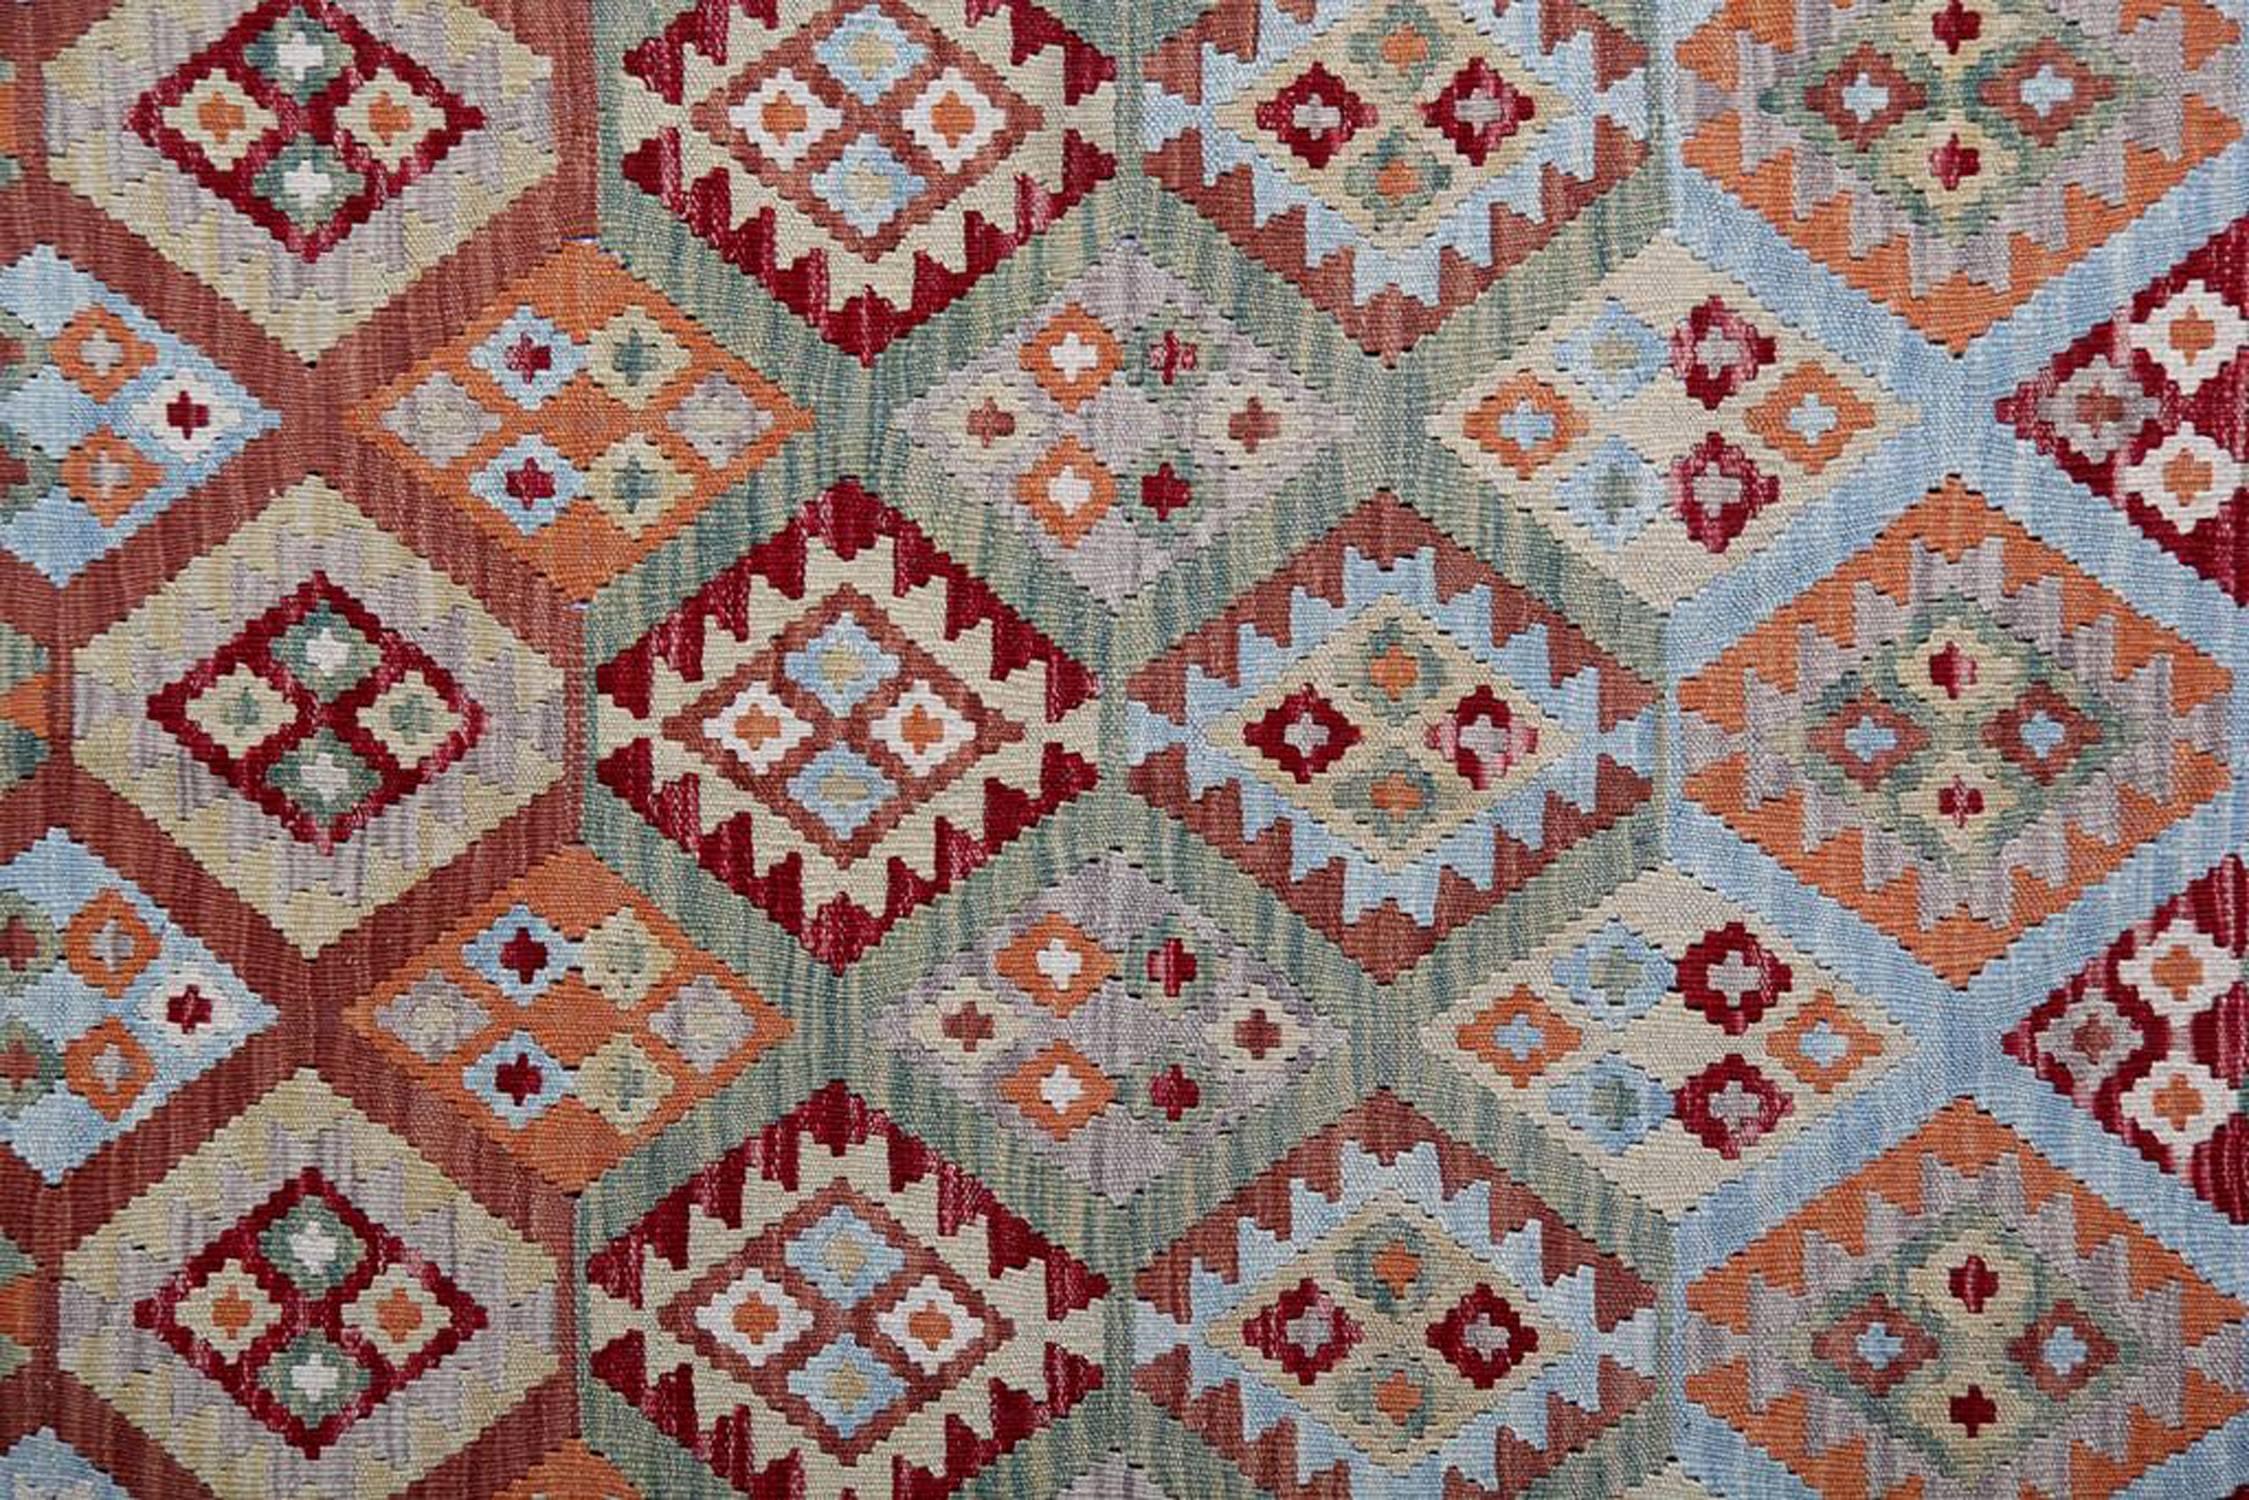 Vegetable Dyed Persian Style Rugs, Kilims from Afghanistan